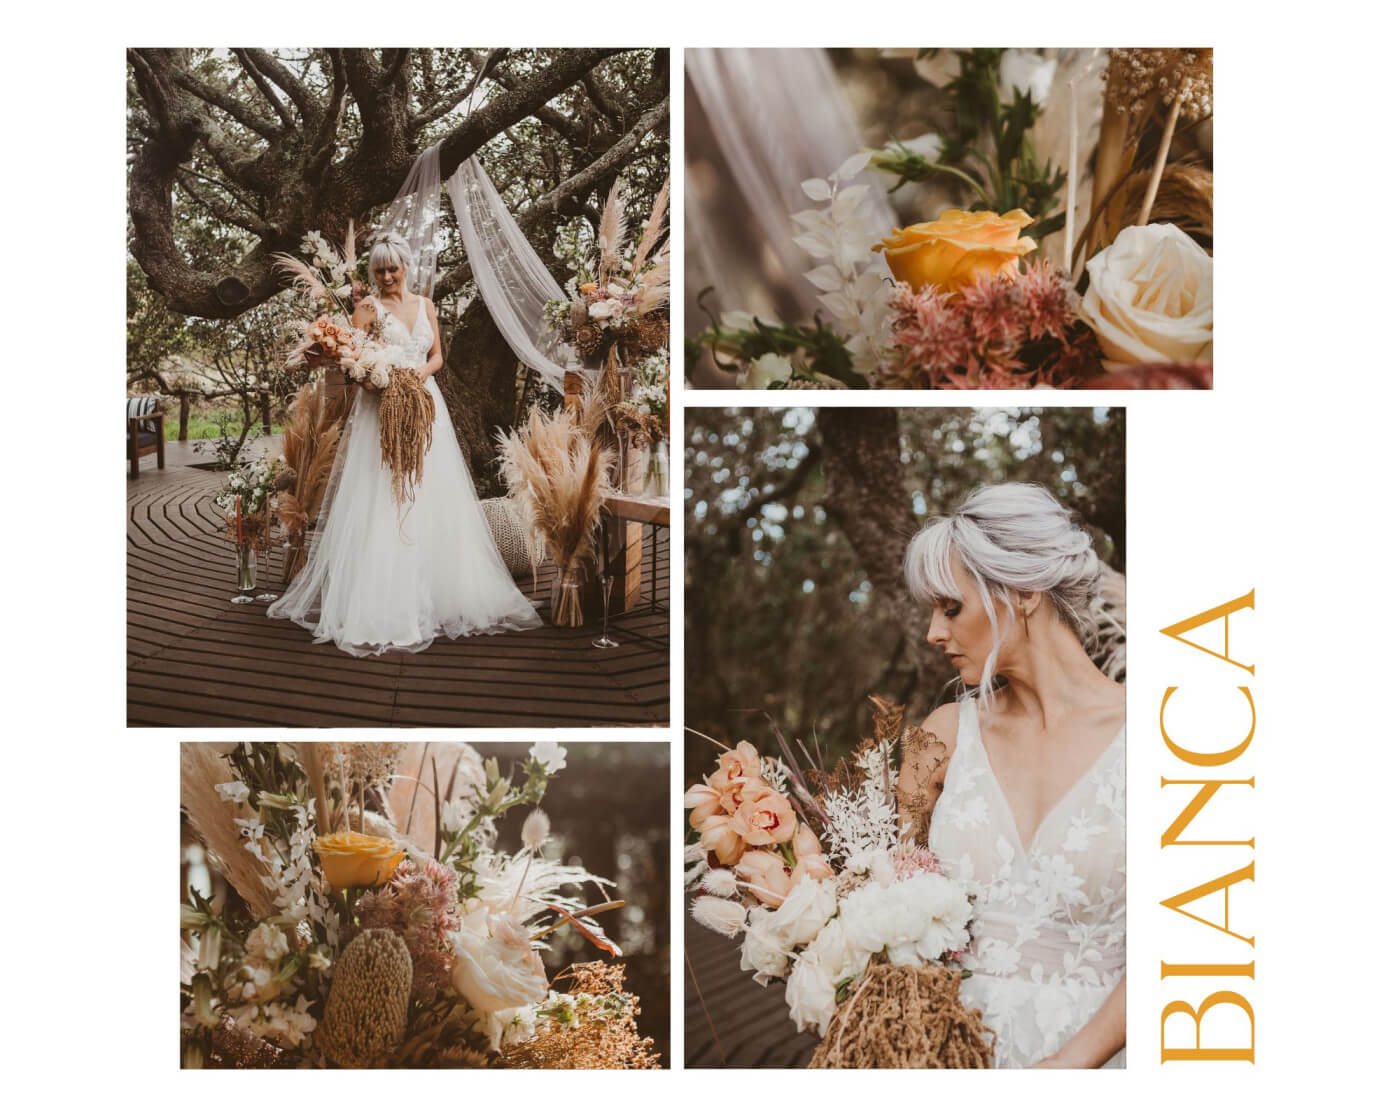 Bianca's wedding dress and bridal bouquet - Fabulous Flowers and Molteno Couture